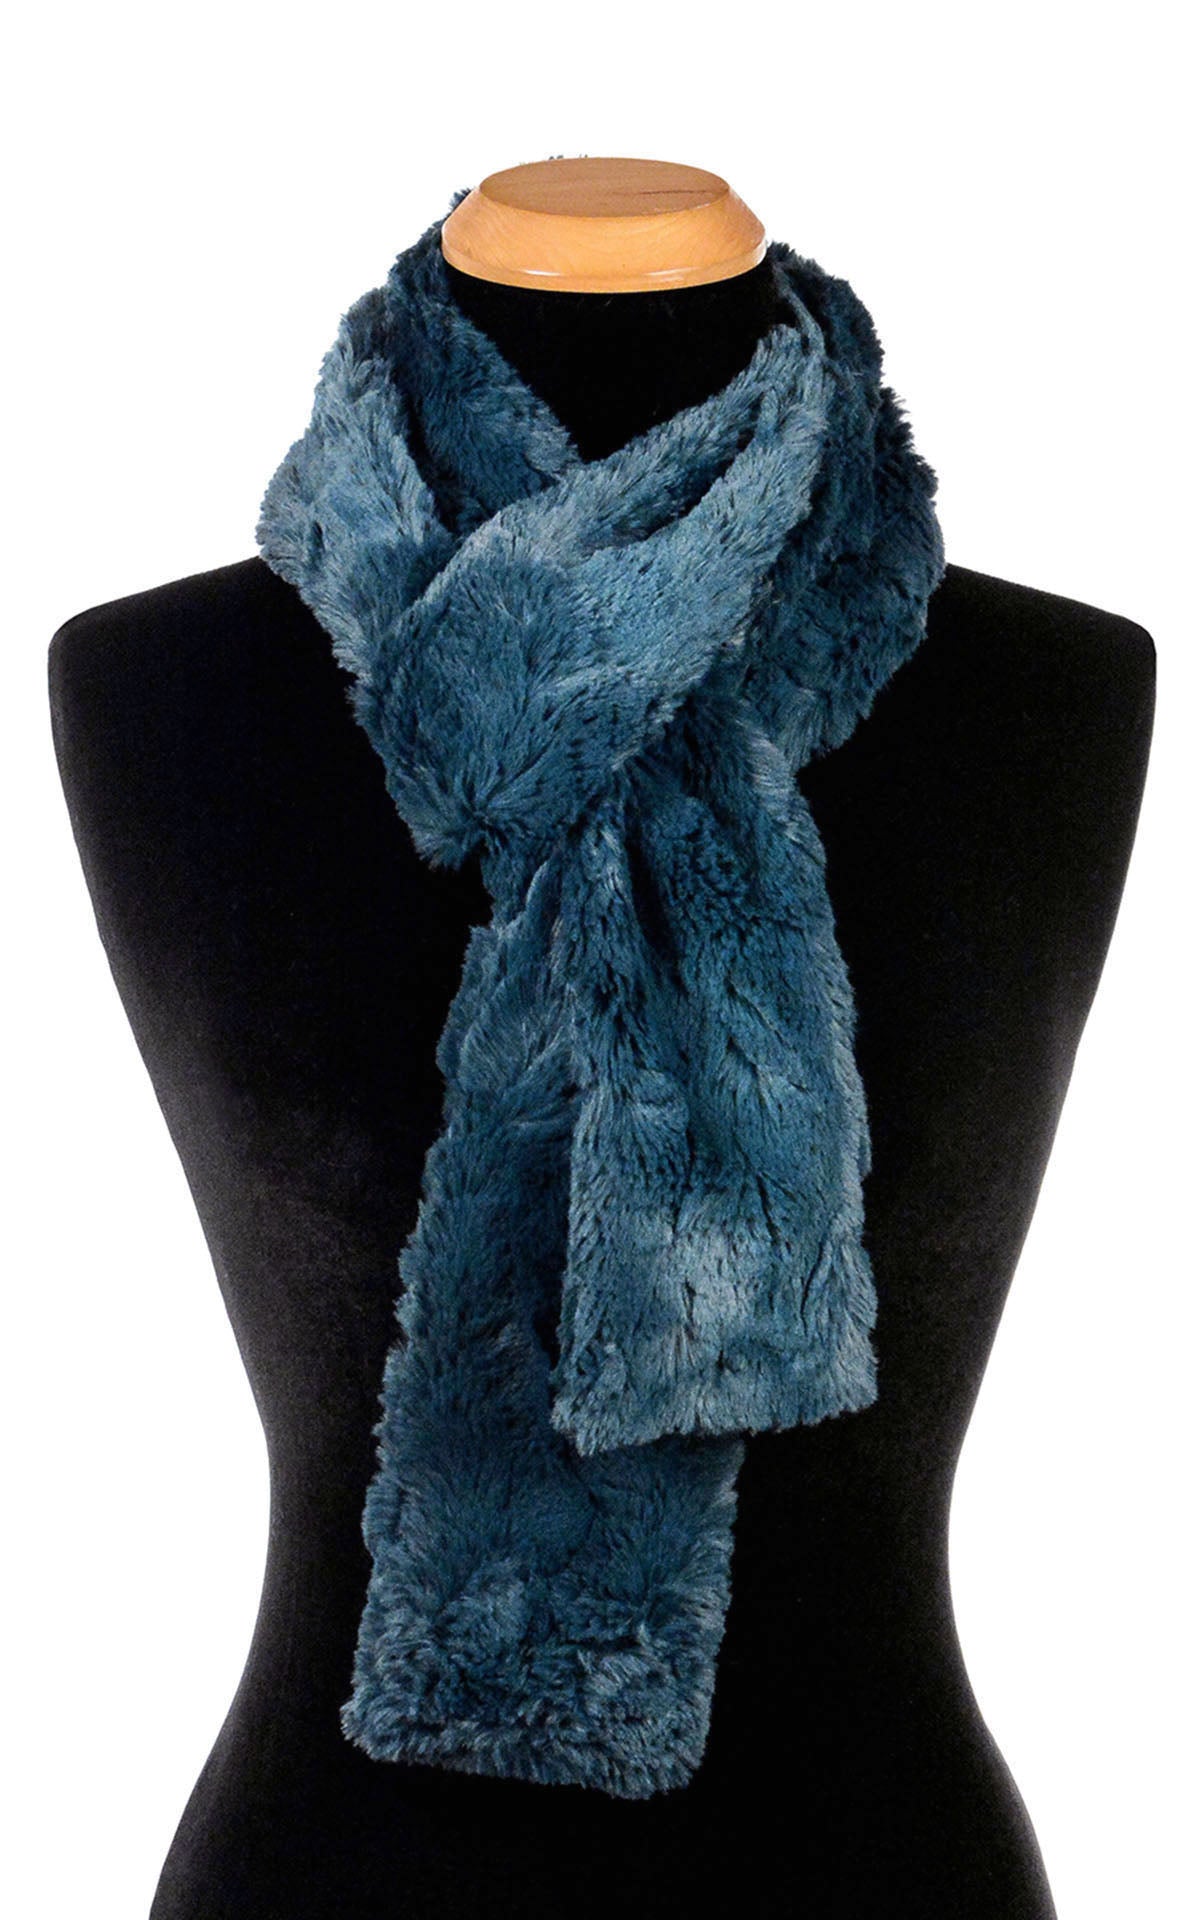 Classic Scarf - Luxury Faux Fur in Peacock Pond